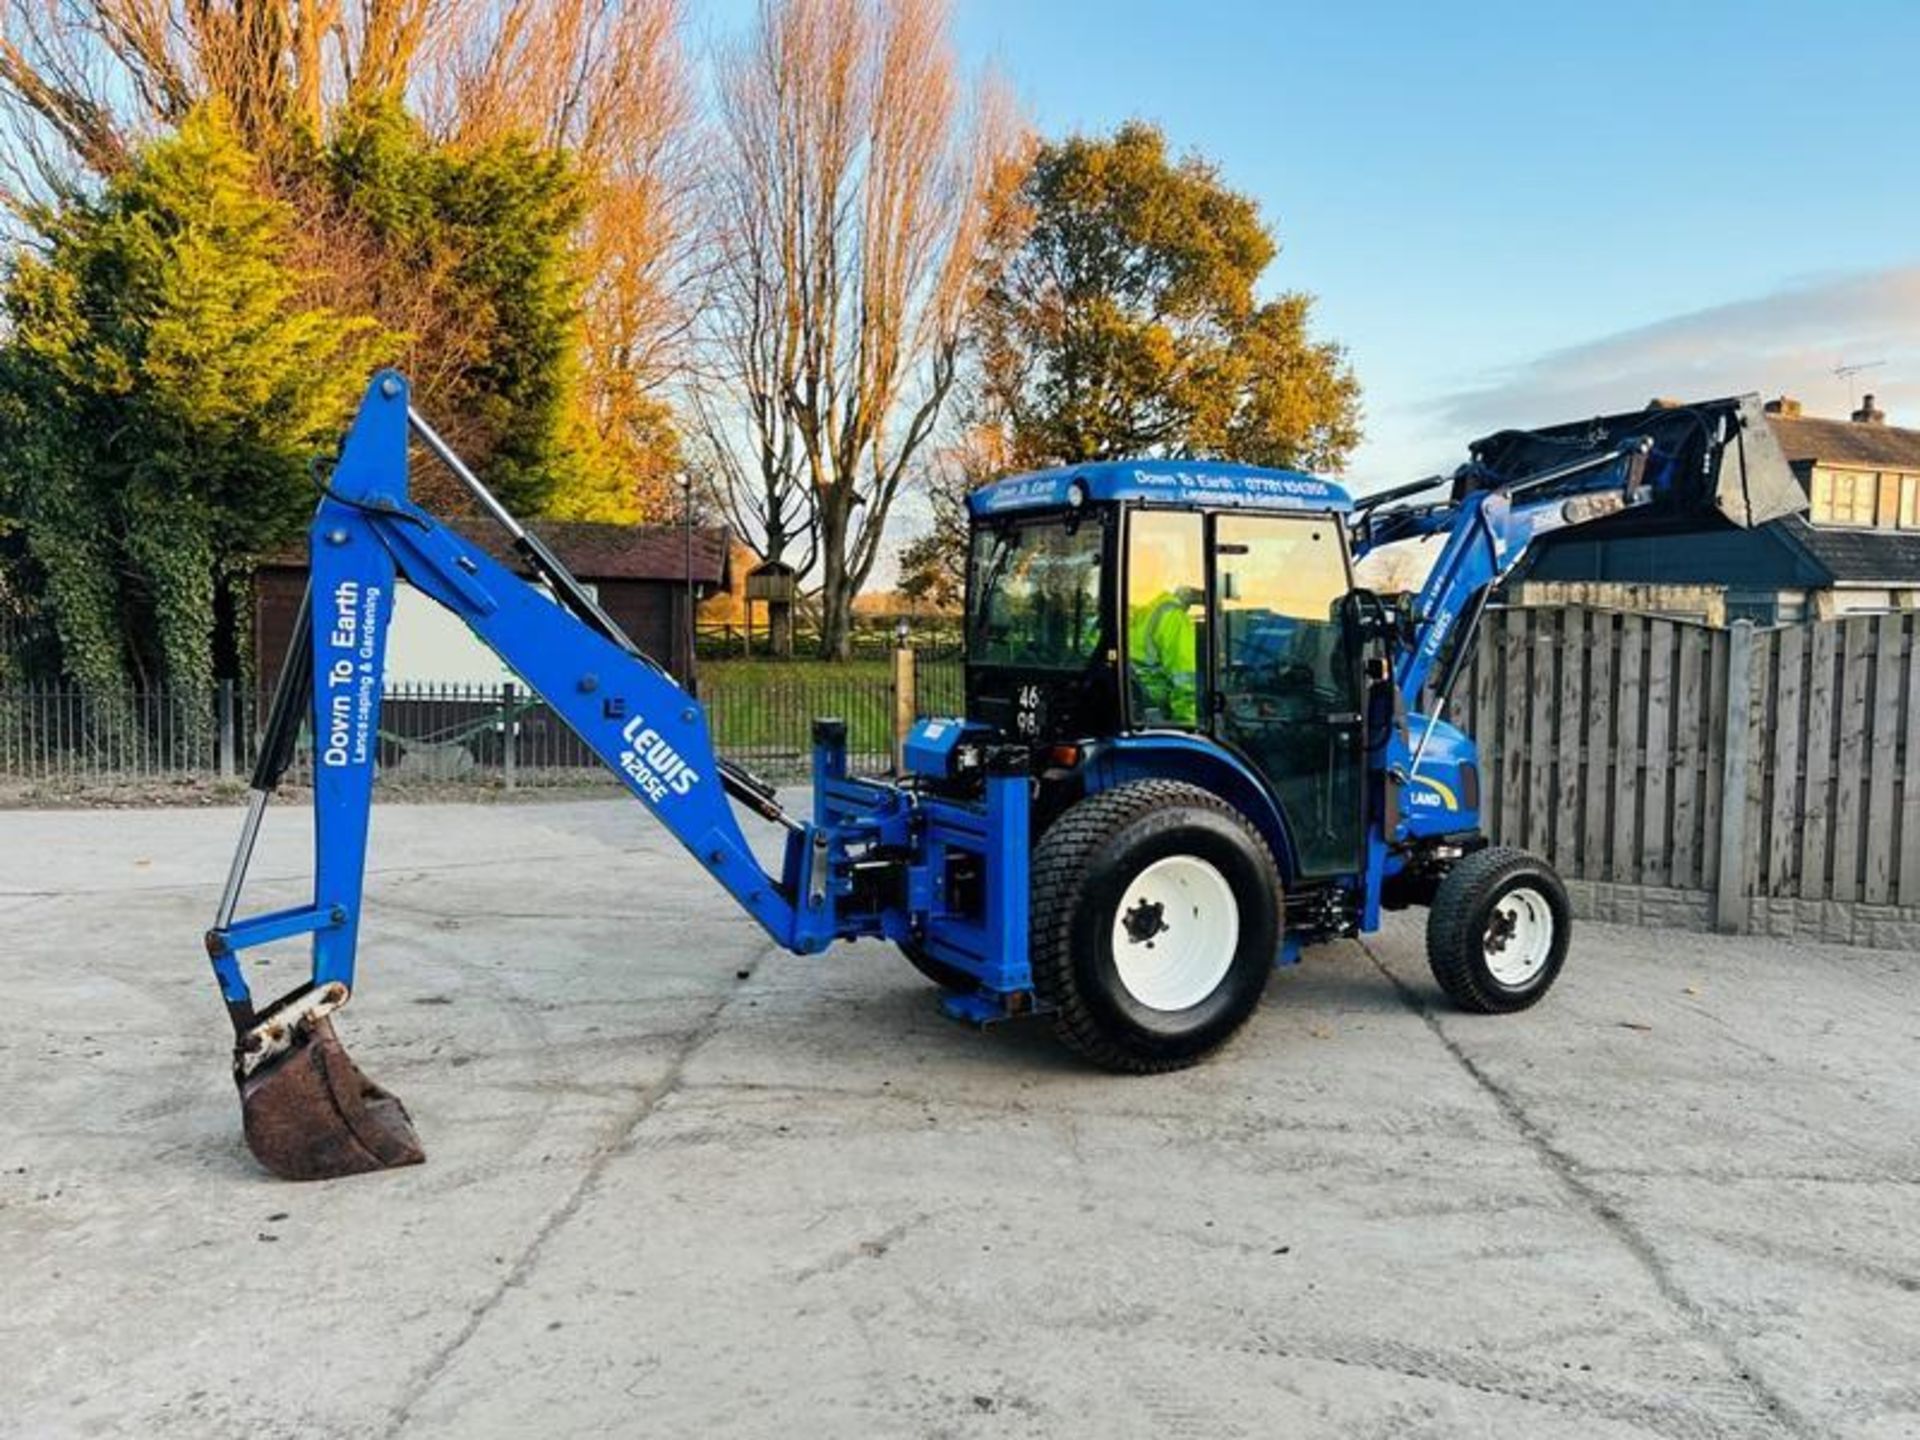 NEW HOLLAND BOOMER 40 4WD TRACTOR *YEAR 2014, ONLY 737 HRS* C/W LOADER & BACK TRACTOR - Image 5 of 19